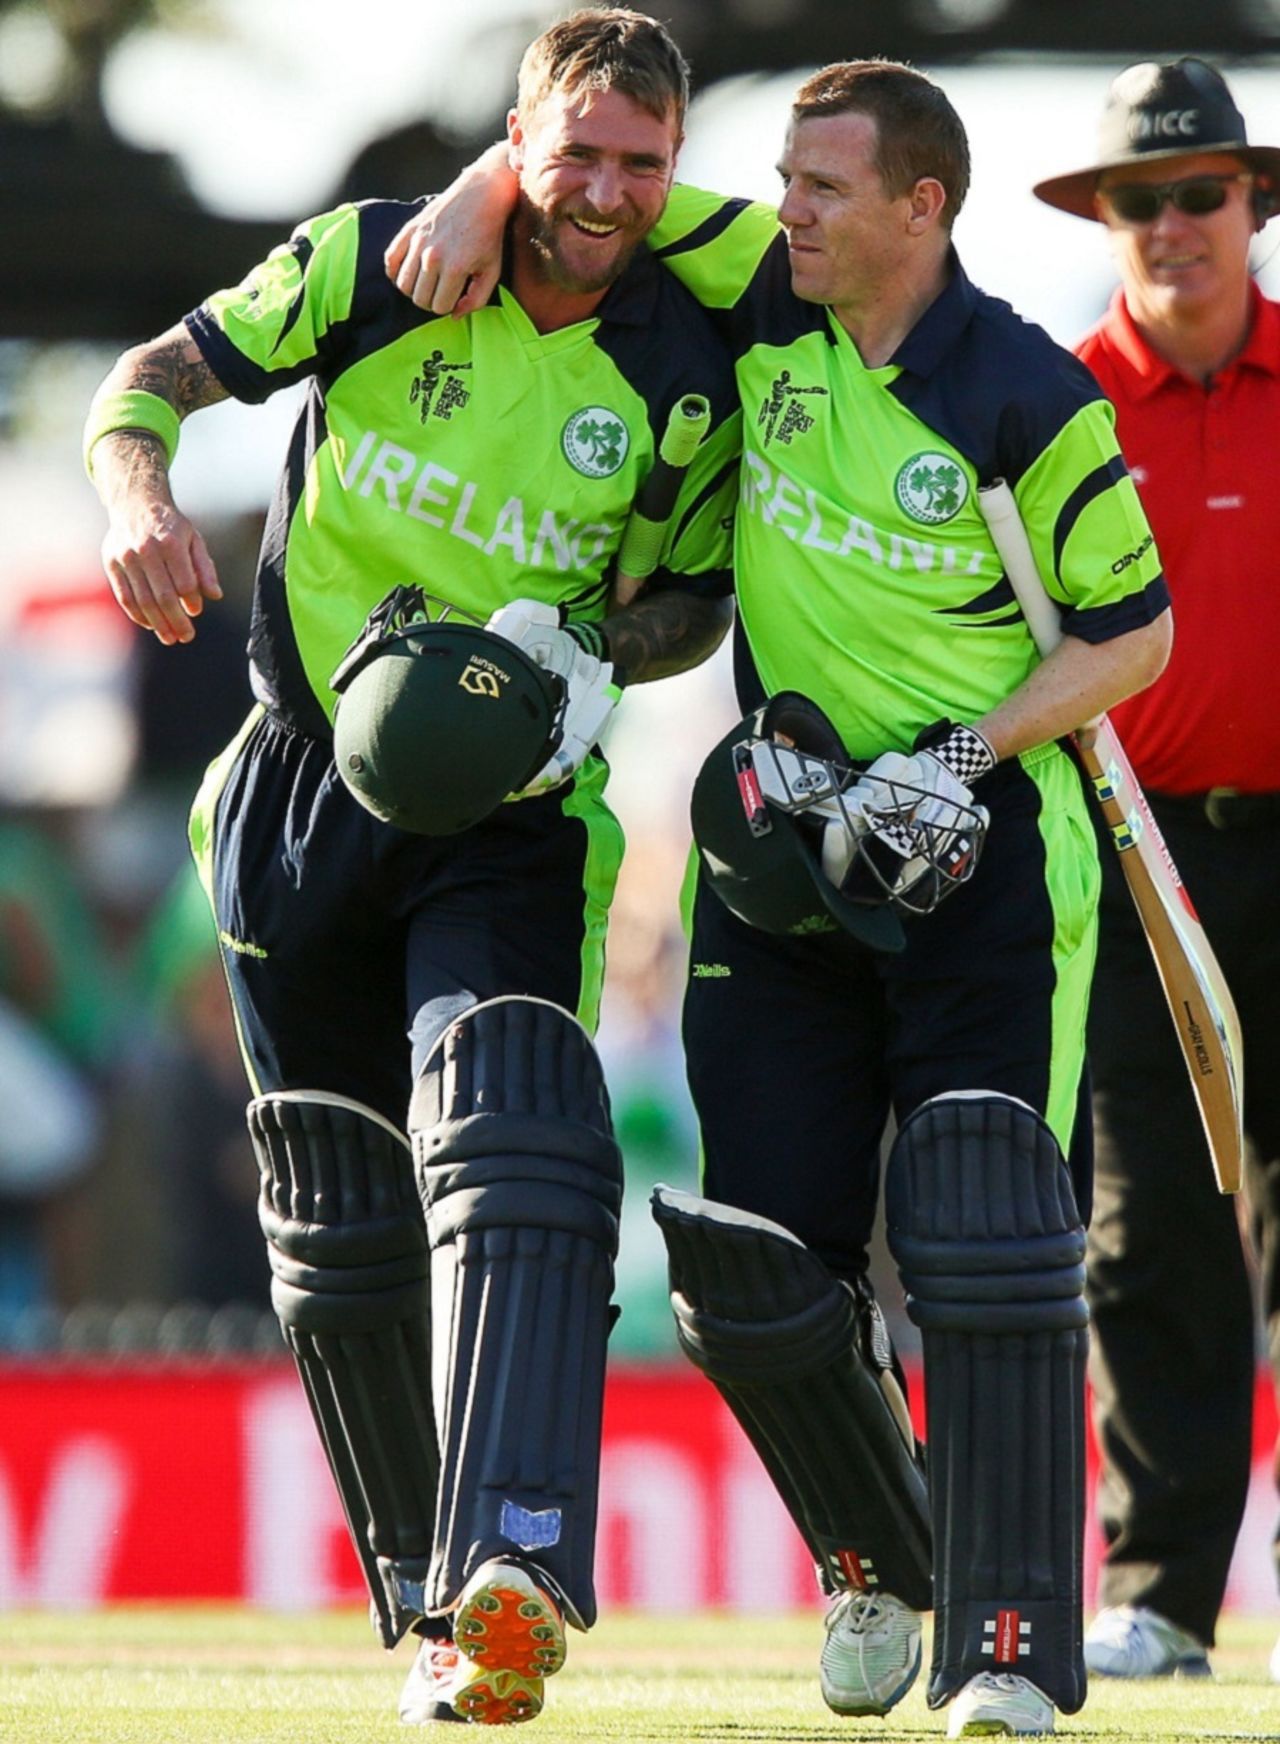 John Mooney and Niall O'Brien are jubilant after the victory, Ireland v West Indies, World Cup 2015, Group B, Nelson, February 16, 2015